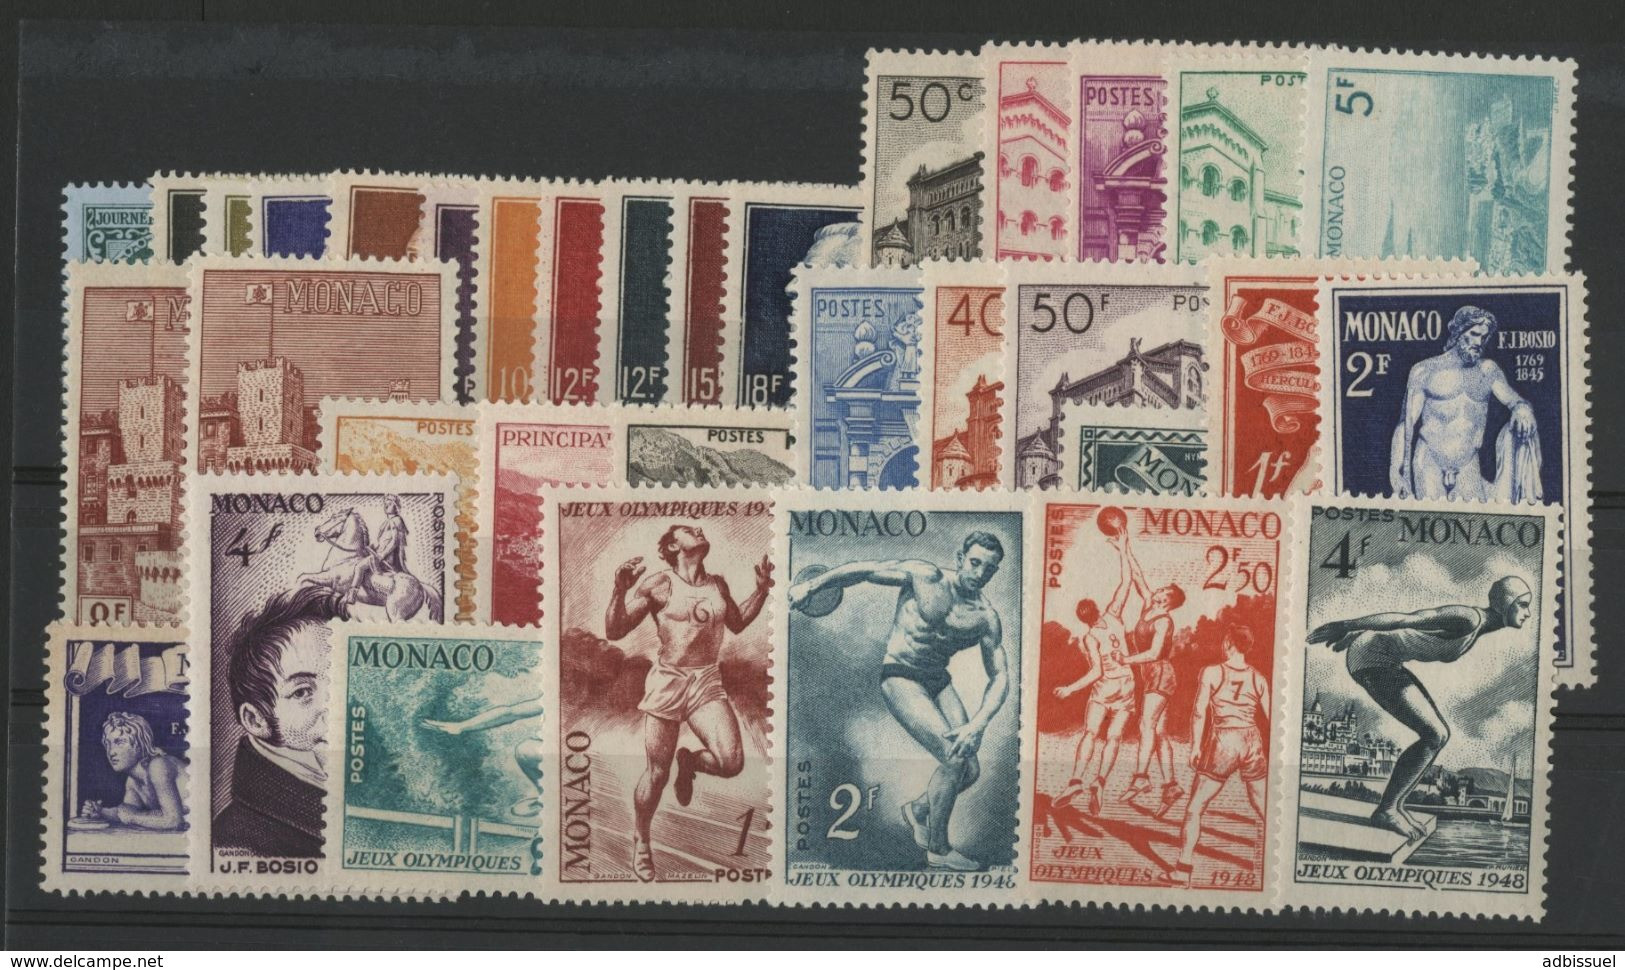 MONACO ANNEE COMPLETE 1948 COTE 210 € NEUFS ** MNH N° 301 à 323 Soit 34 Timbres. TB - Años Completos